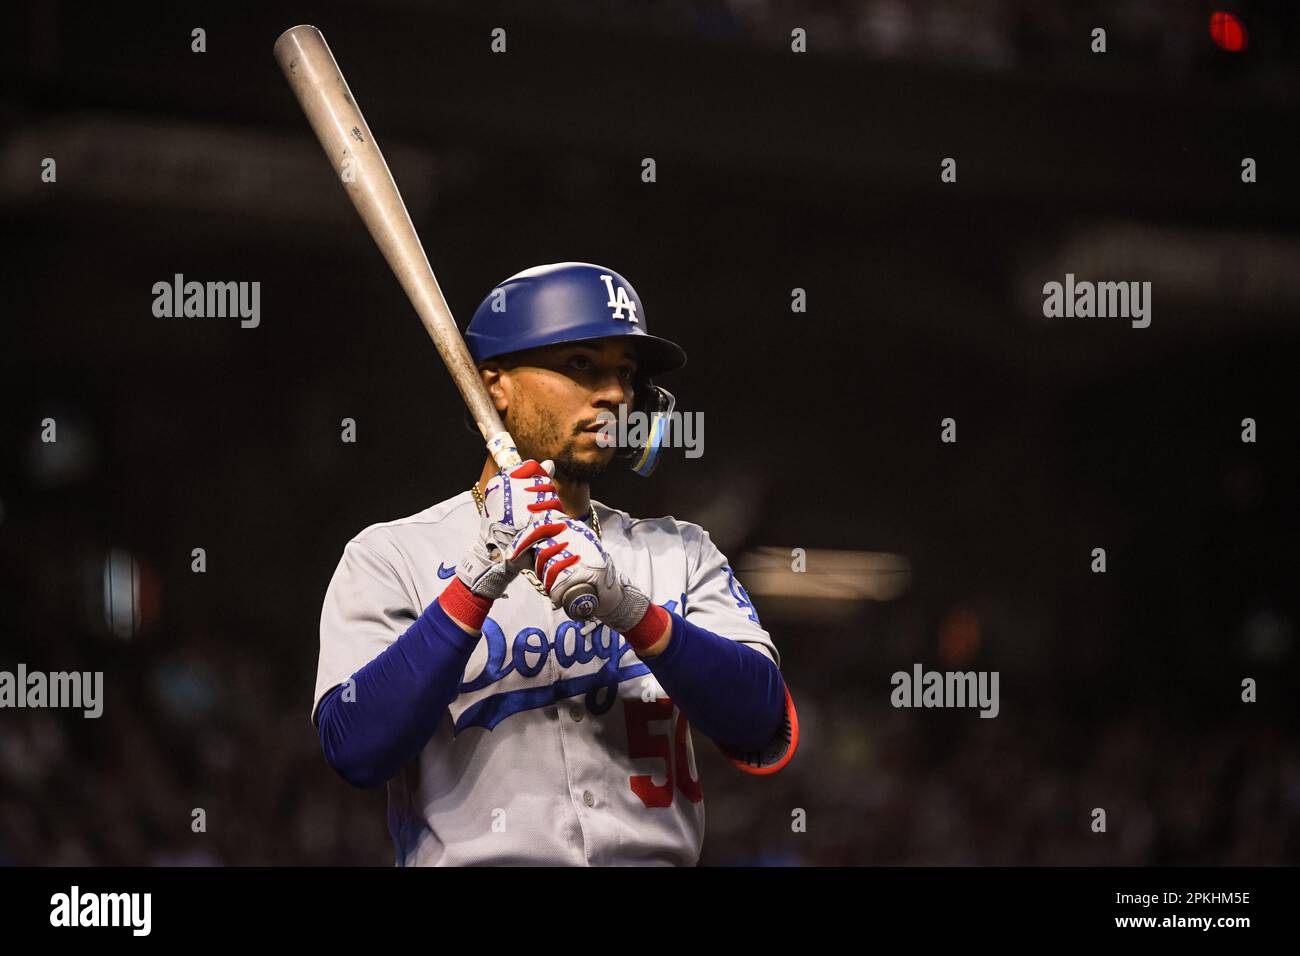 Los Angeles Dodgers right fielder Mookie Betts (50) stands in the on-deck circle against the Arizona Diamondbacks in the second inning of an MLB baseb Stock Photo